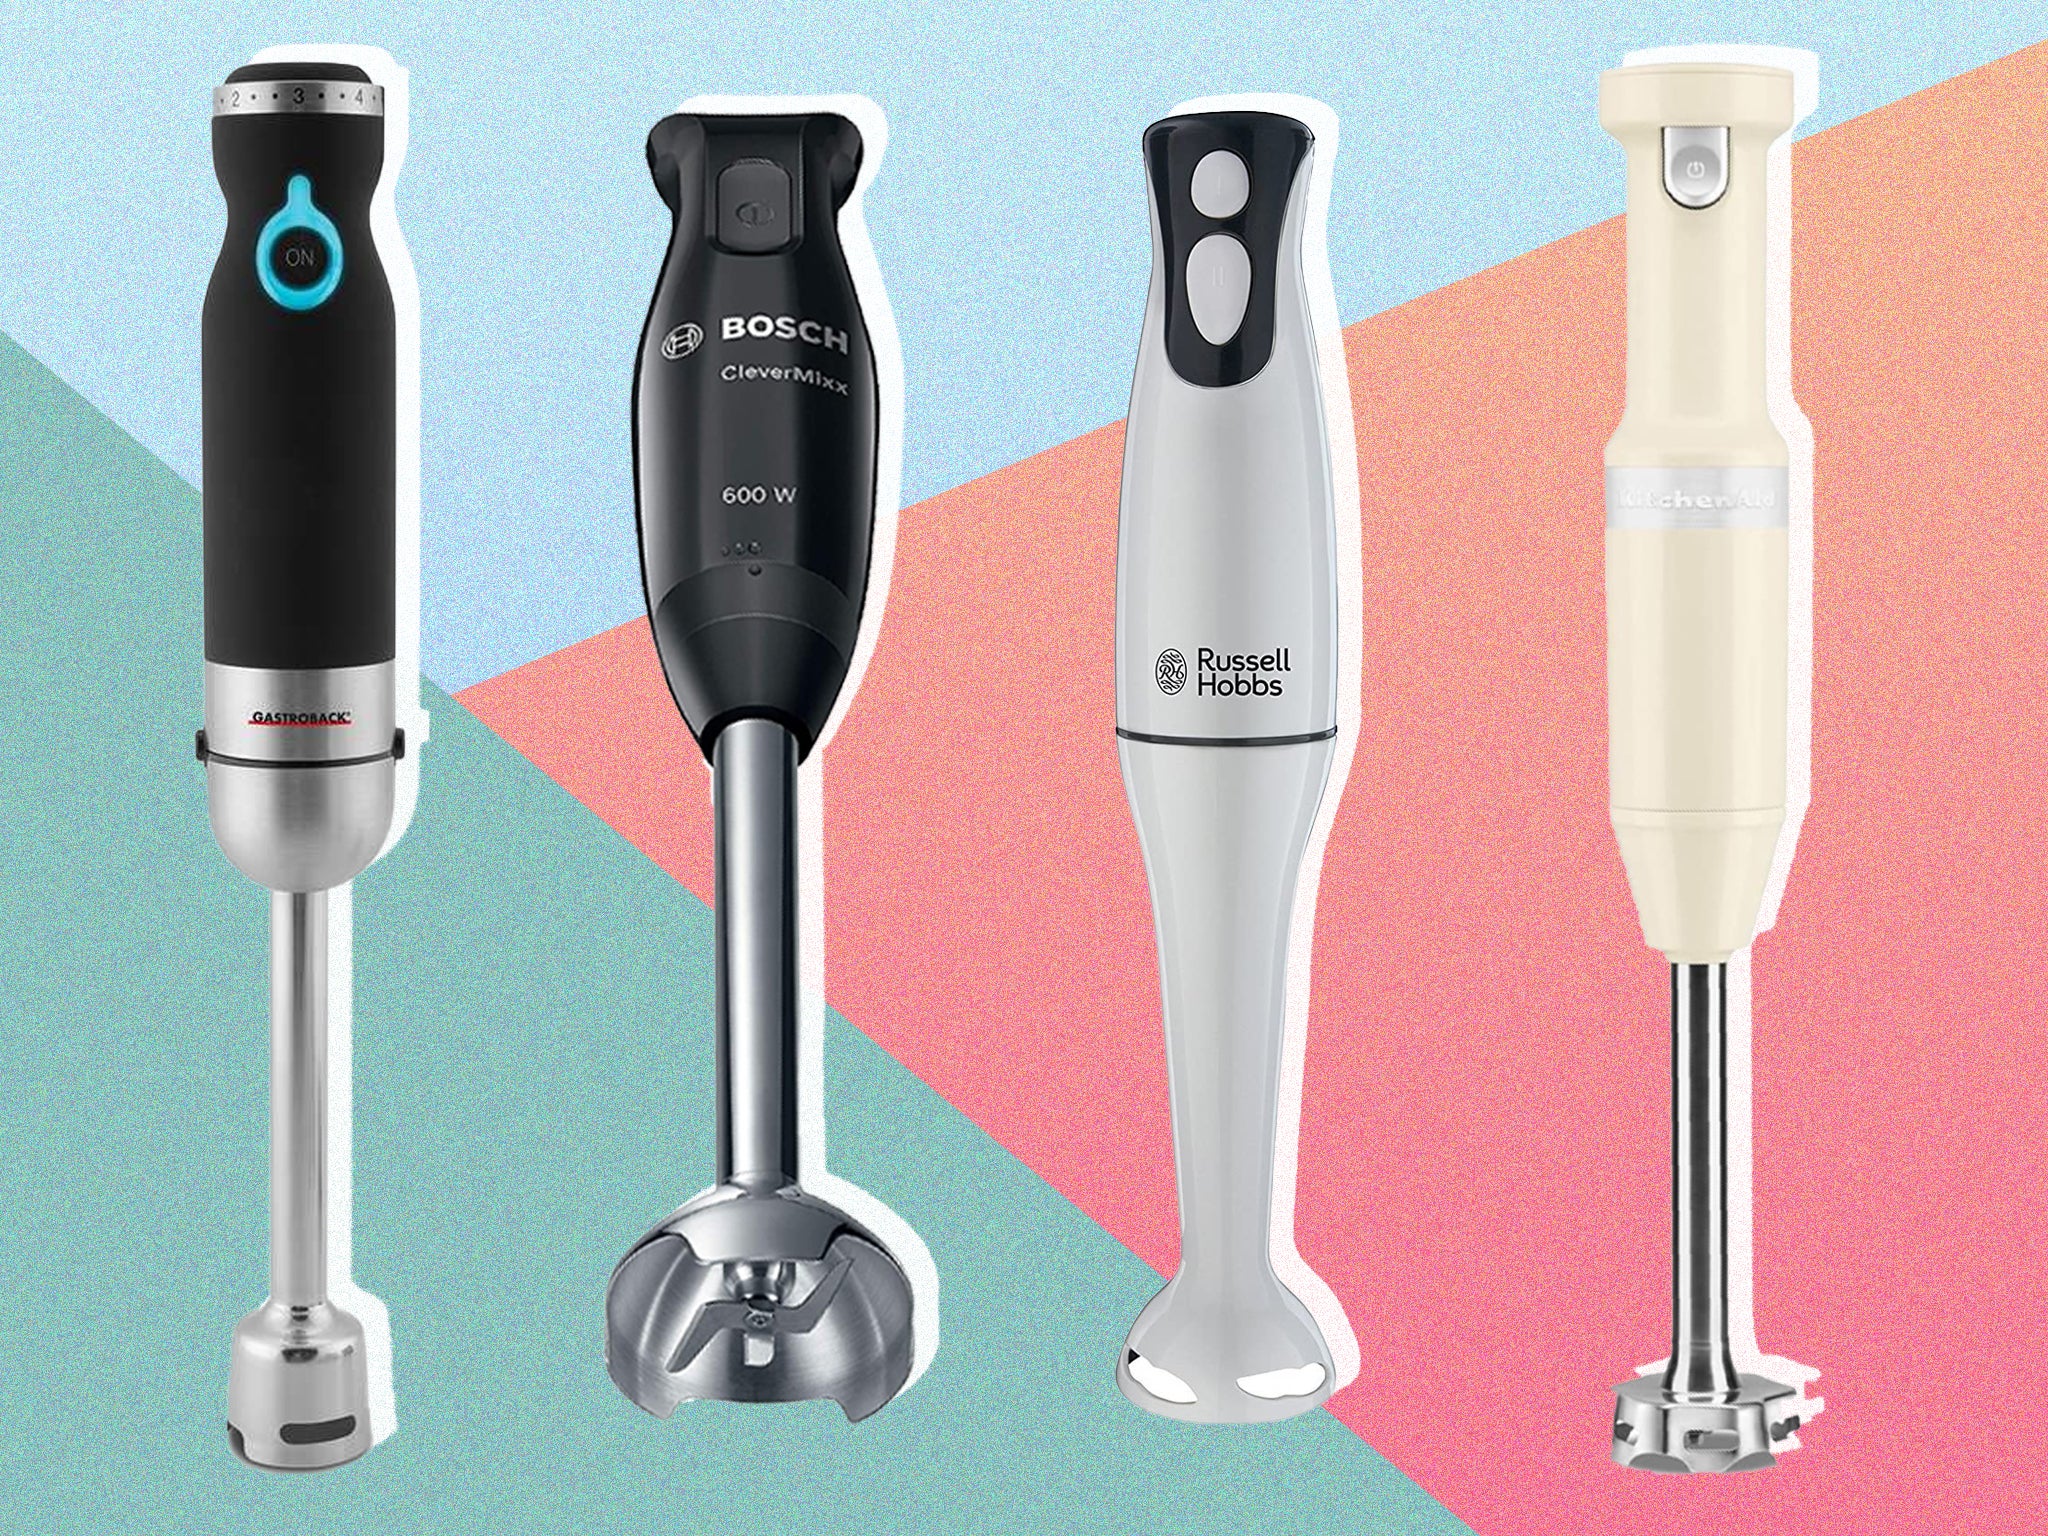 Best blenders Multi-purpose cordless designs tried tested | The Independent